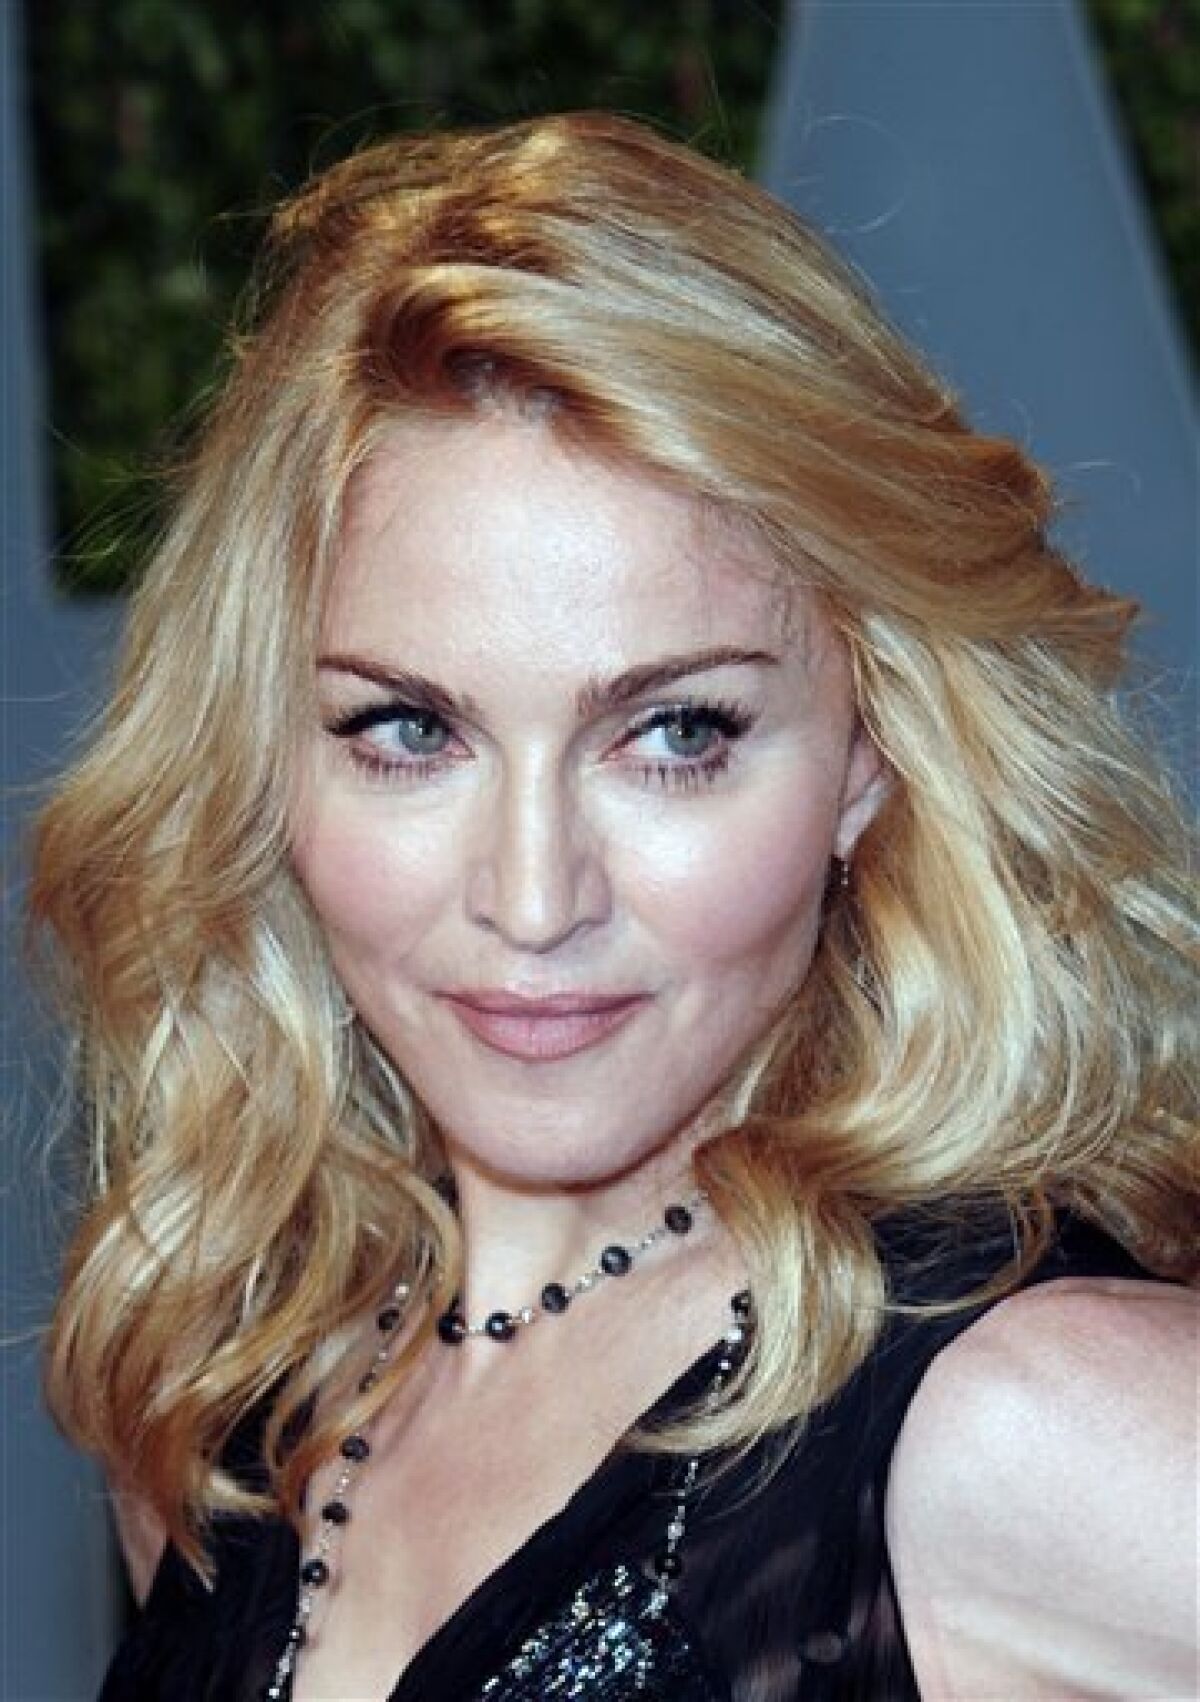 FILE - In this Feb. 22, 2009 file photo, Madonna arrives at the Vanity Fair Oscar party , in West Hollywood, Calif. The father of a girl from Malawi whom Madonna hopes to adopt says he's capable of taking care of his daughter. Madonna's appeal of a court ruling denying her request to adopt the girl is to be heard Monday, May 4, 2009, in Malawi. (AP Photo/Evan Agostini, file)